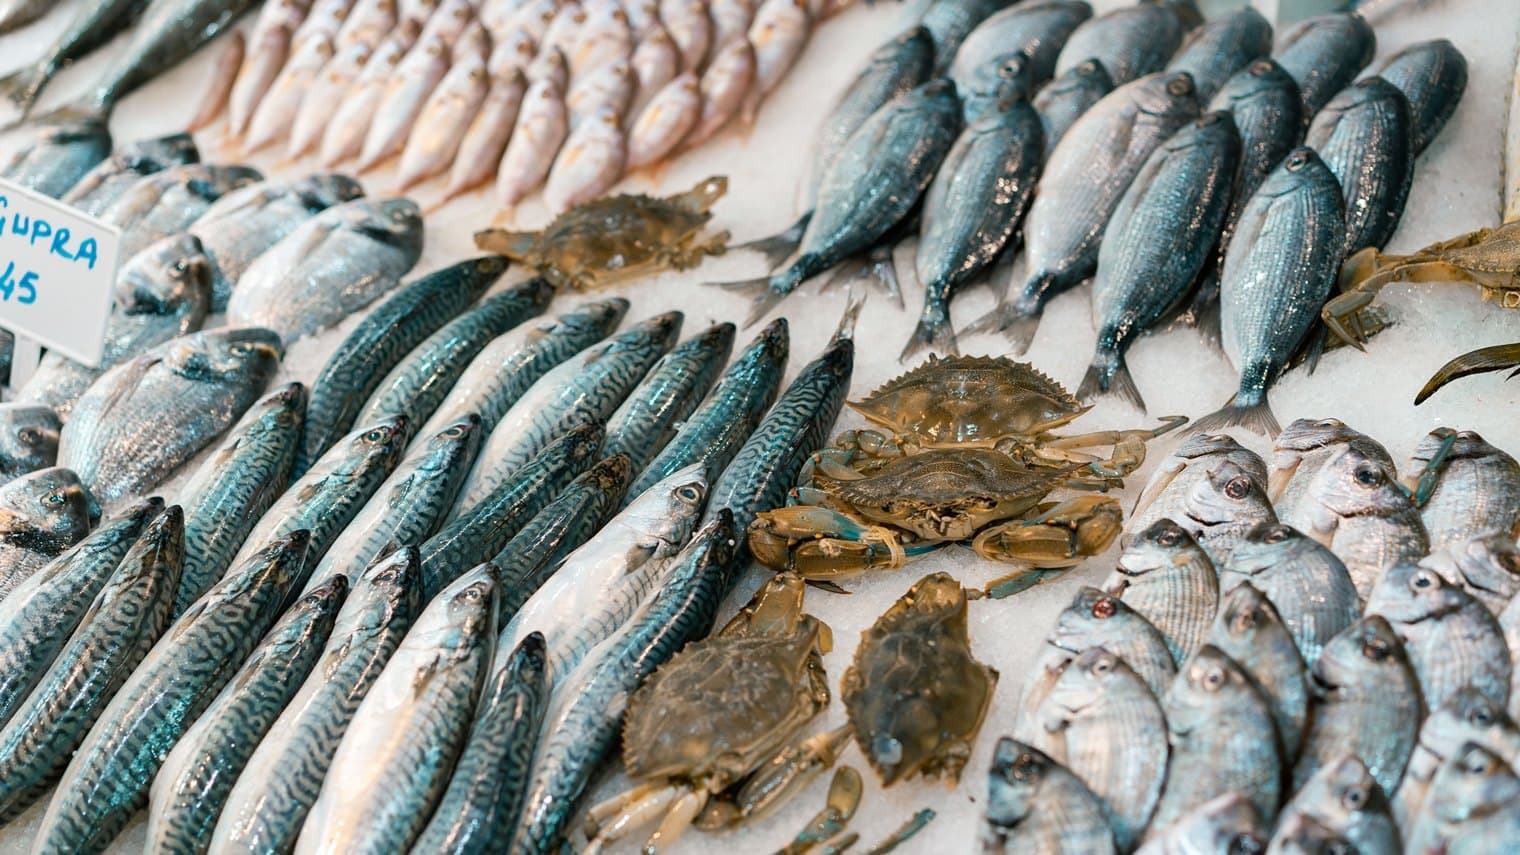 Dubai-Based Startup Seafood Souq Asks, ‘Is Your Fish a Fraud?’